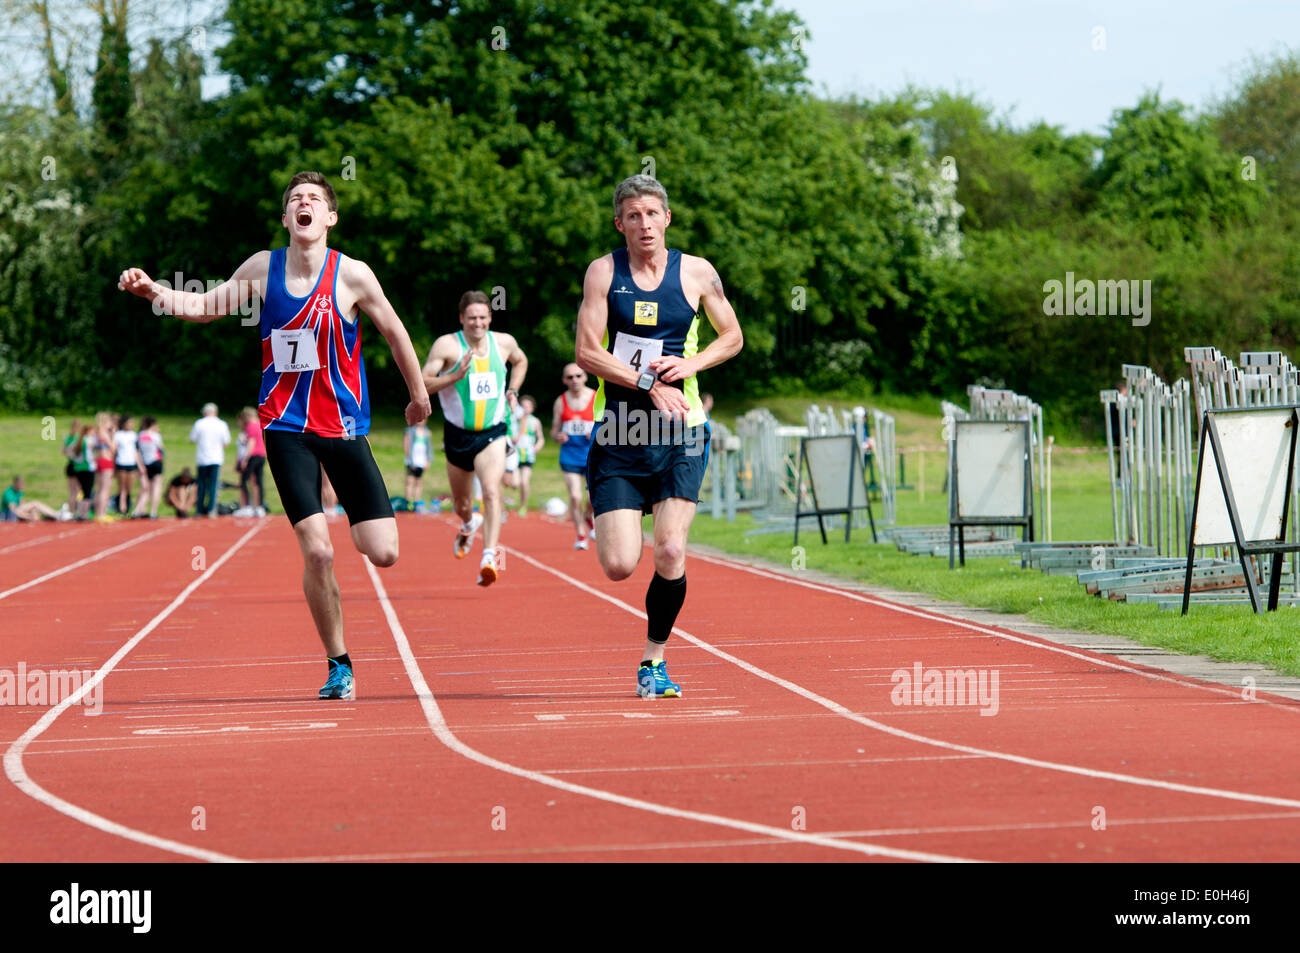 Athletics, runners at finish of men`s 1500m race at club level, UK Stock Photo